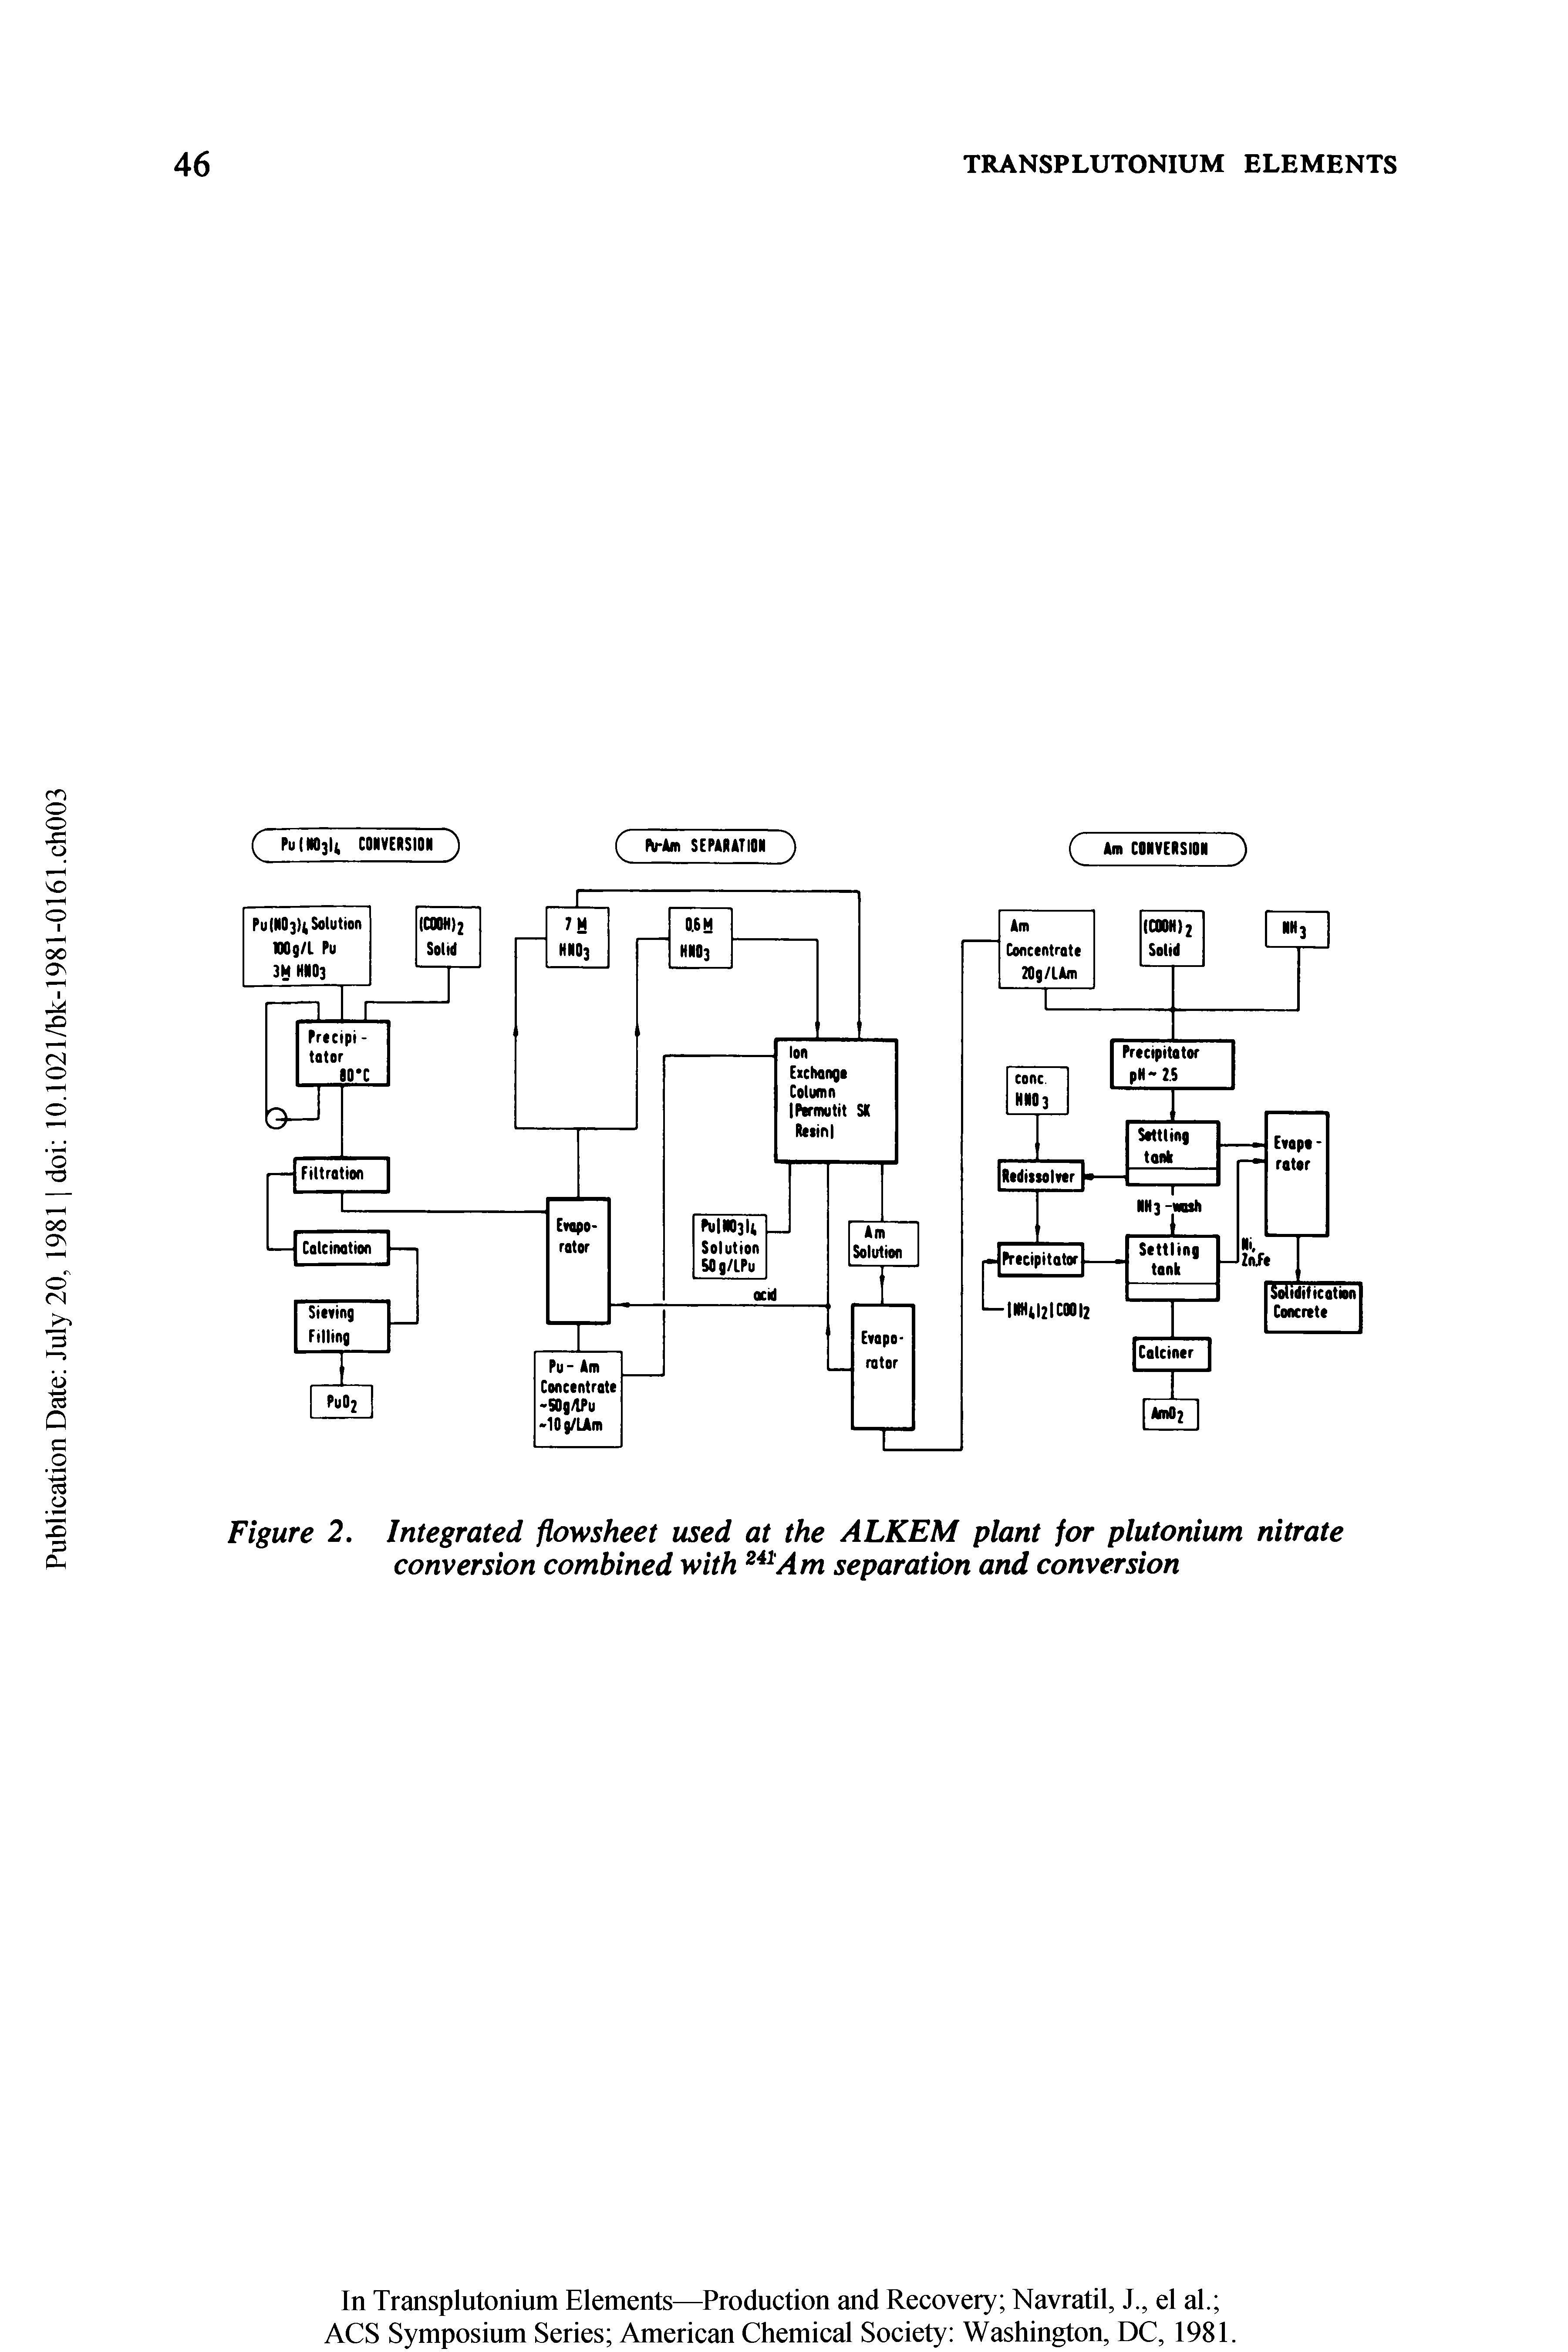 Figure 2. Integrated flowsheet used at the ALKEM plant for plutonium nitrate conversion combined with 241 Am separation and conversion...